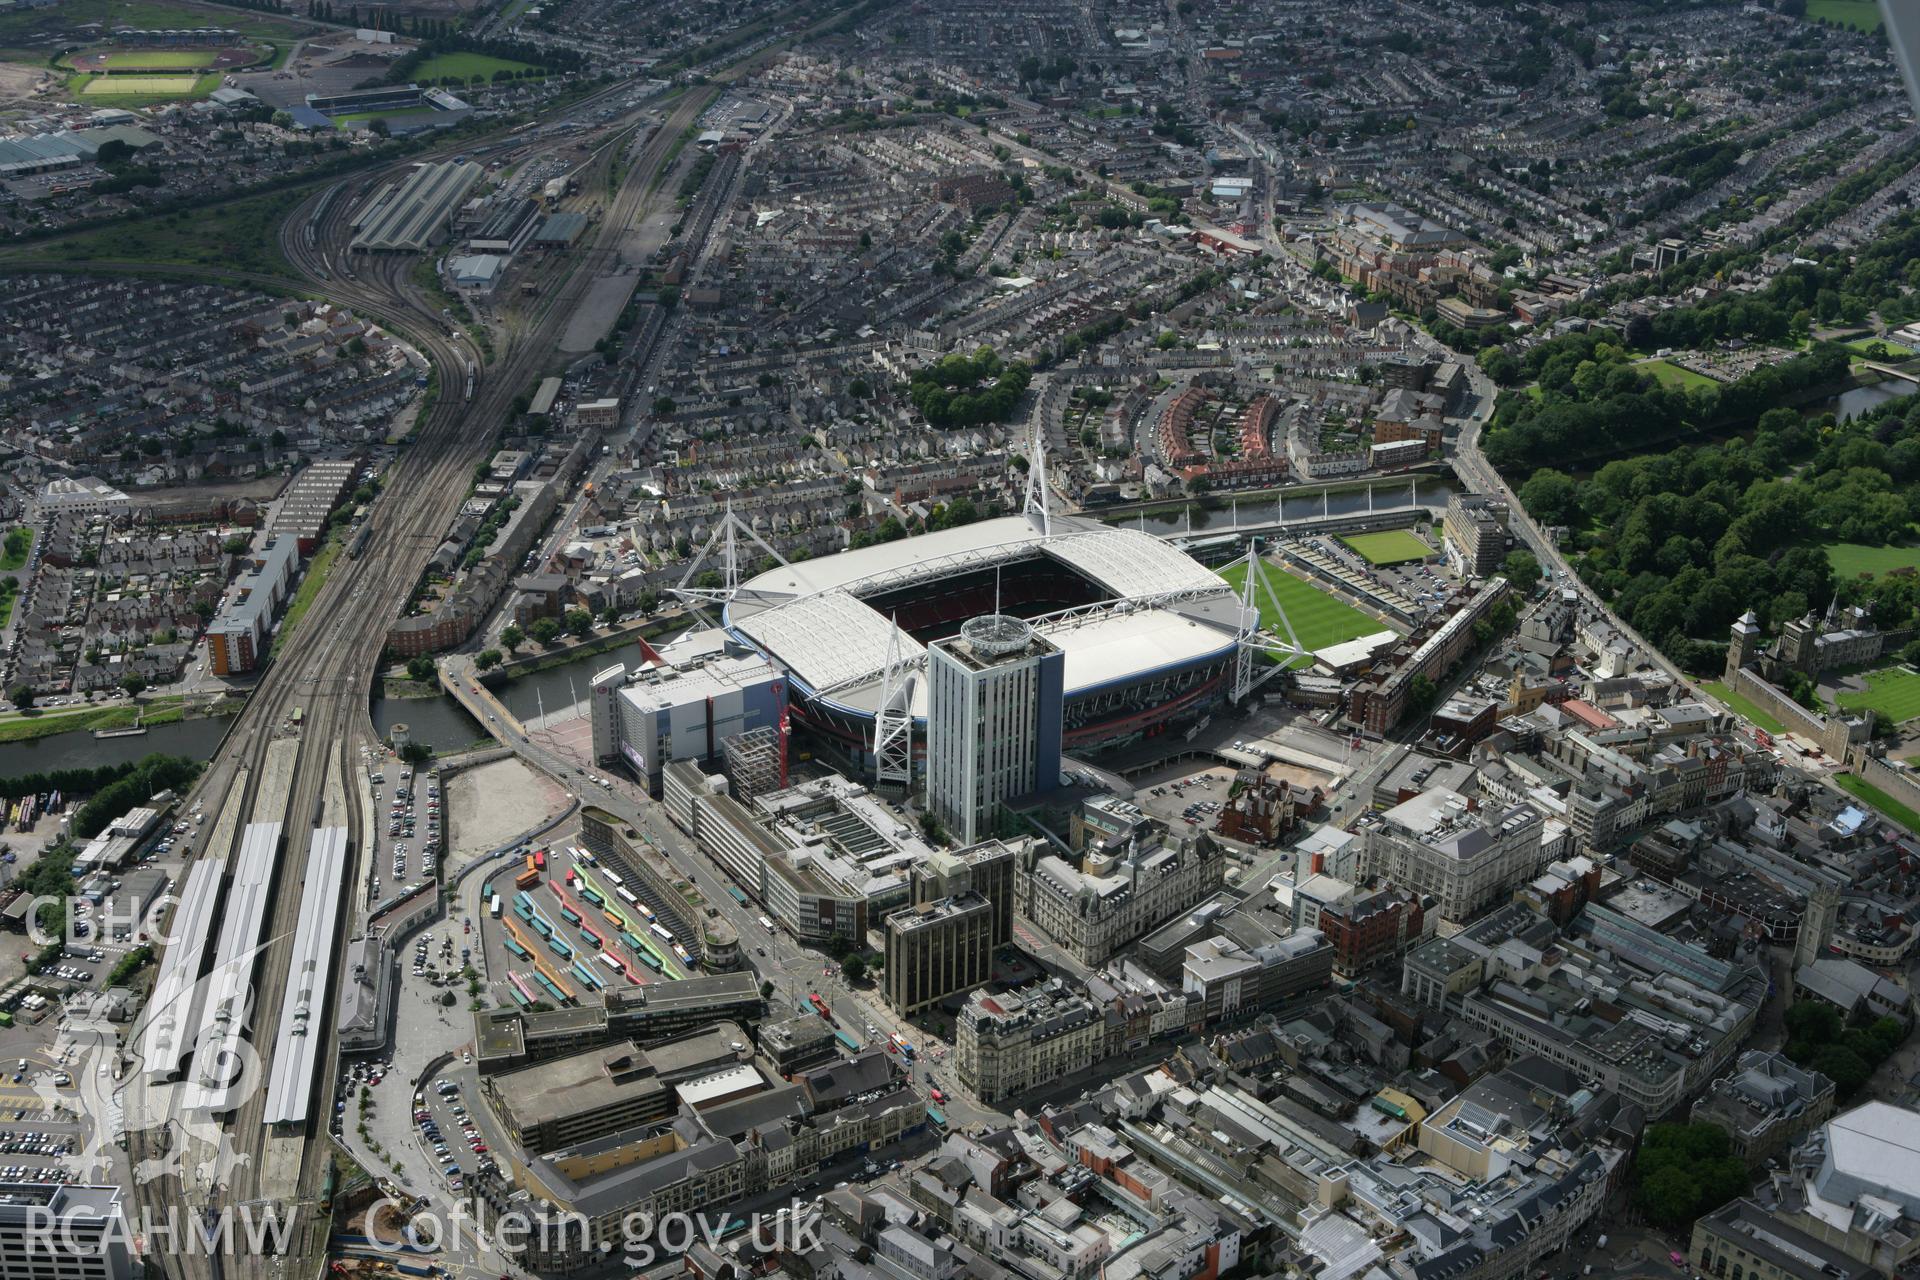 RCAHMW colour oblique aerial photograph of Cardiff Millennium Stadium. Taken on 30 July 2007 by Toby Driver